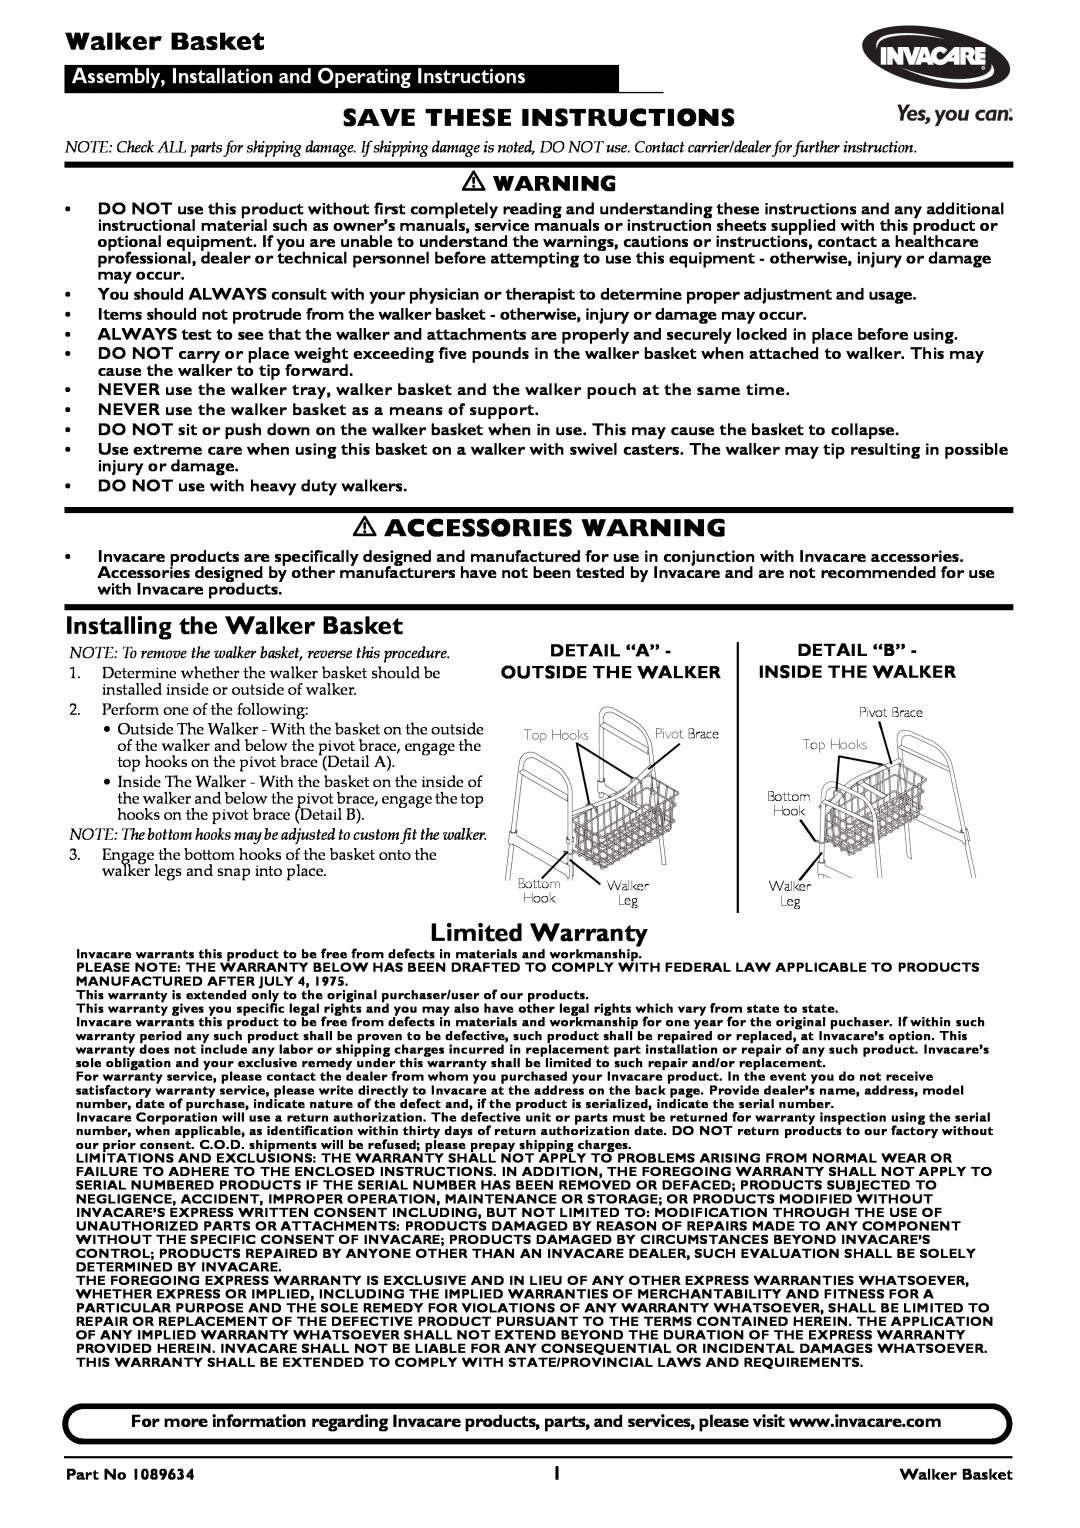 Invacare warranty Save These Instructions, Accessories Warning, Installing the Walker Basket, Limited Warranty 